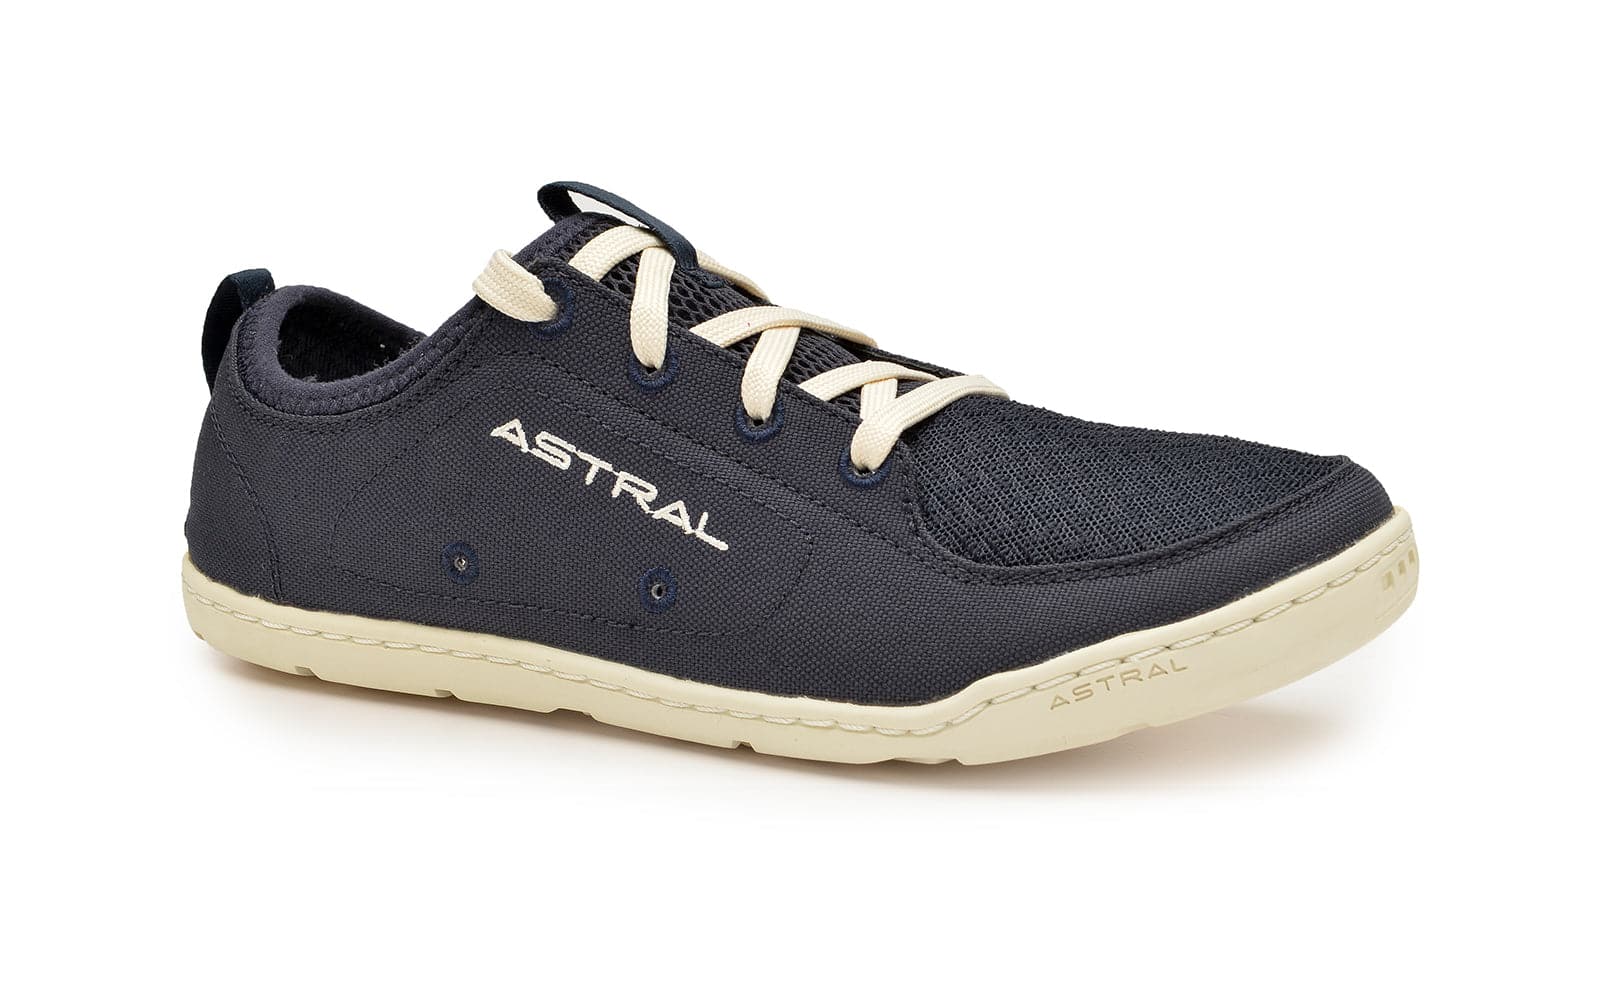 Featuring the Loyak - Women's women's footwear manufactured by Astral shown here from a fifth angle.